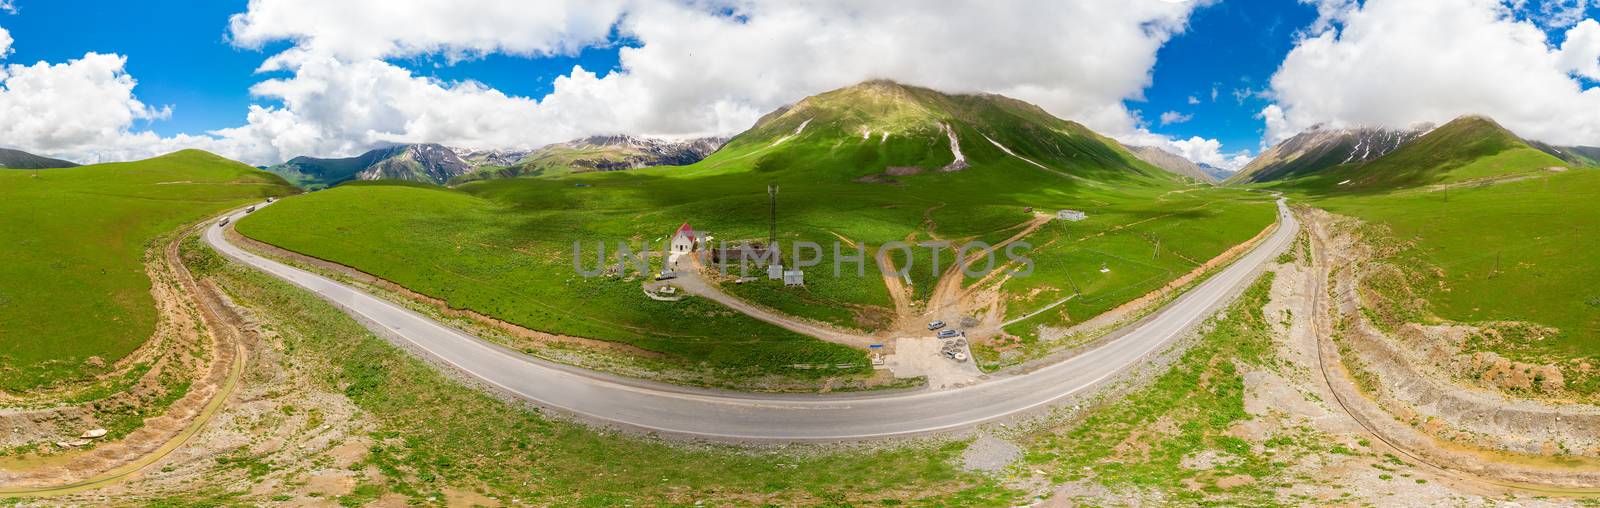 winding Georgian Military Road surrounded by mountains landscape panorama of Georgia